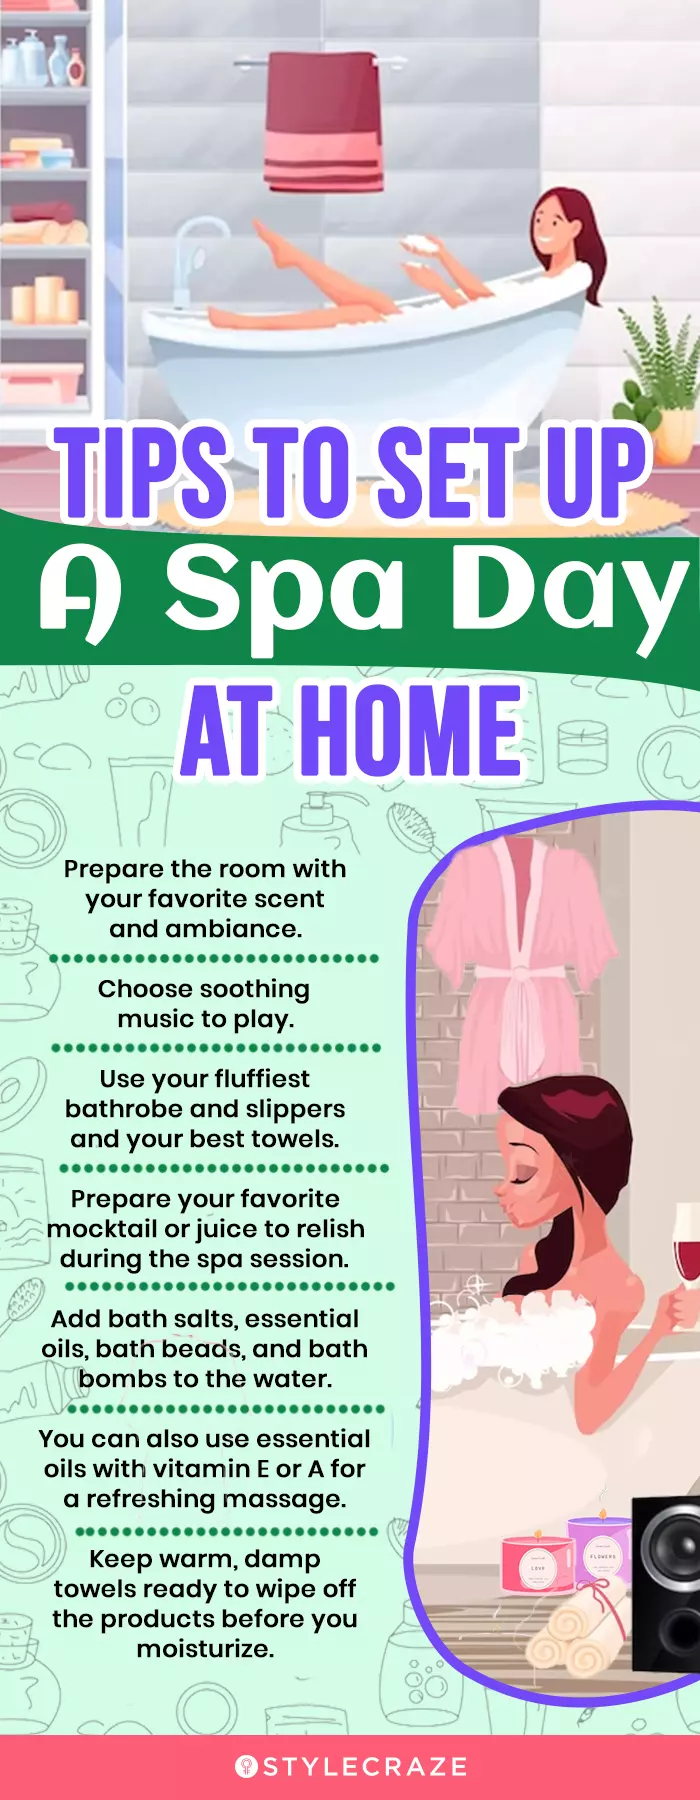 Tips To Set Up A Spa Day At Home (infographic)